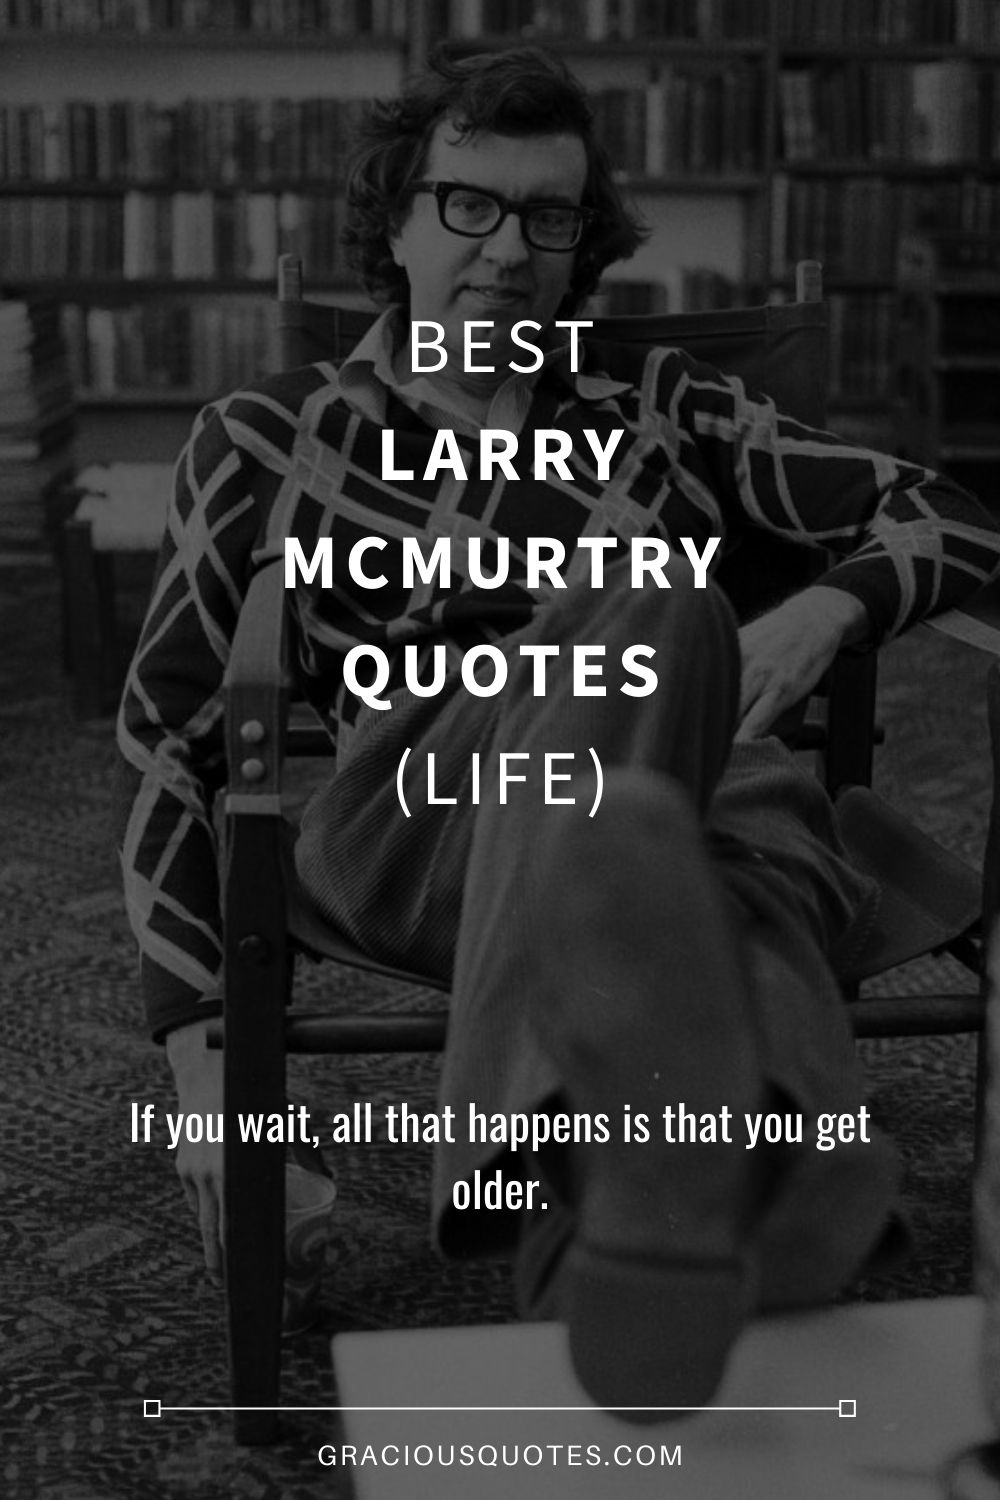 Best Larry McMurtry Quotes (LIFE) - Gracious Quotes